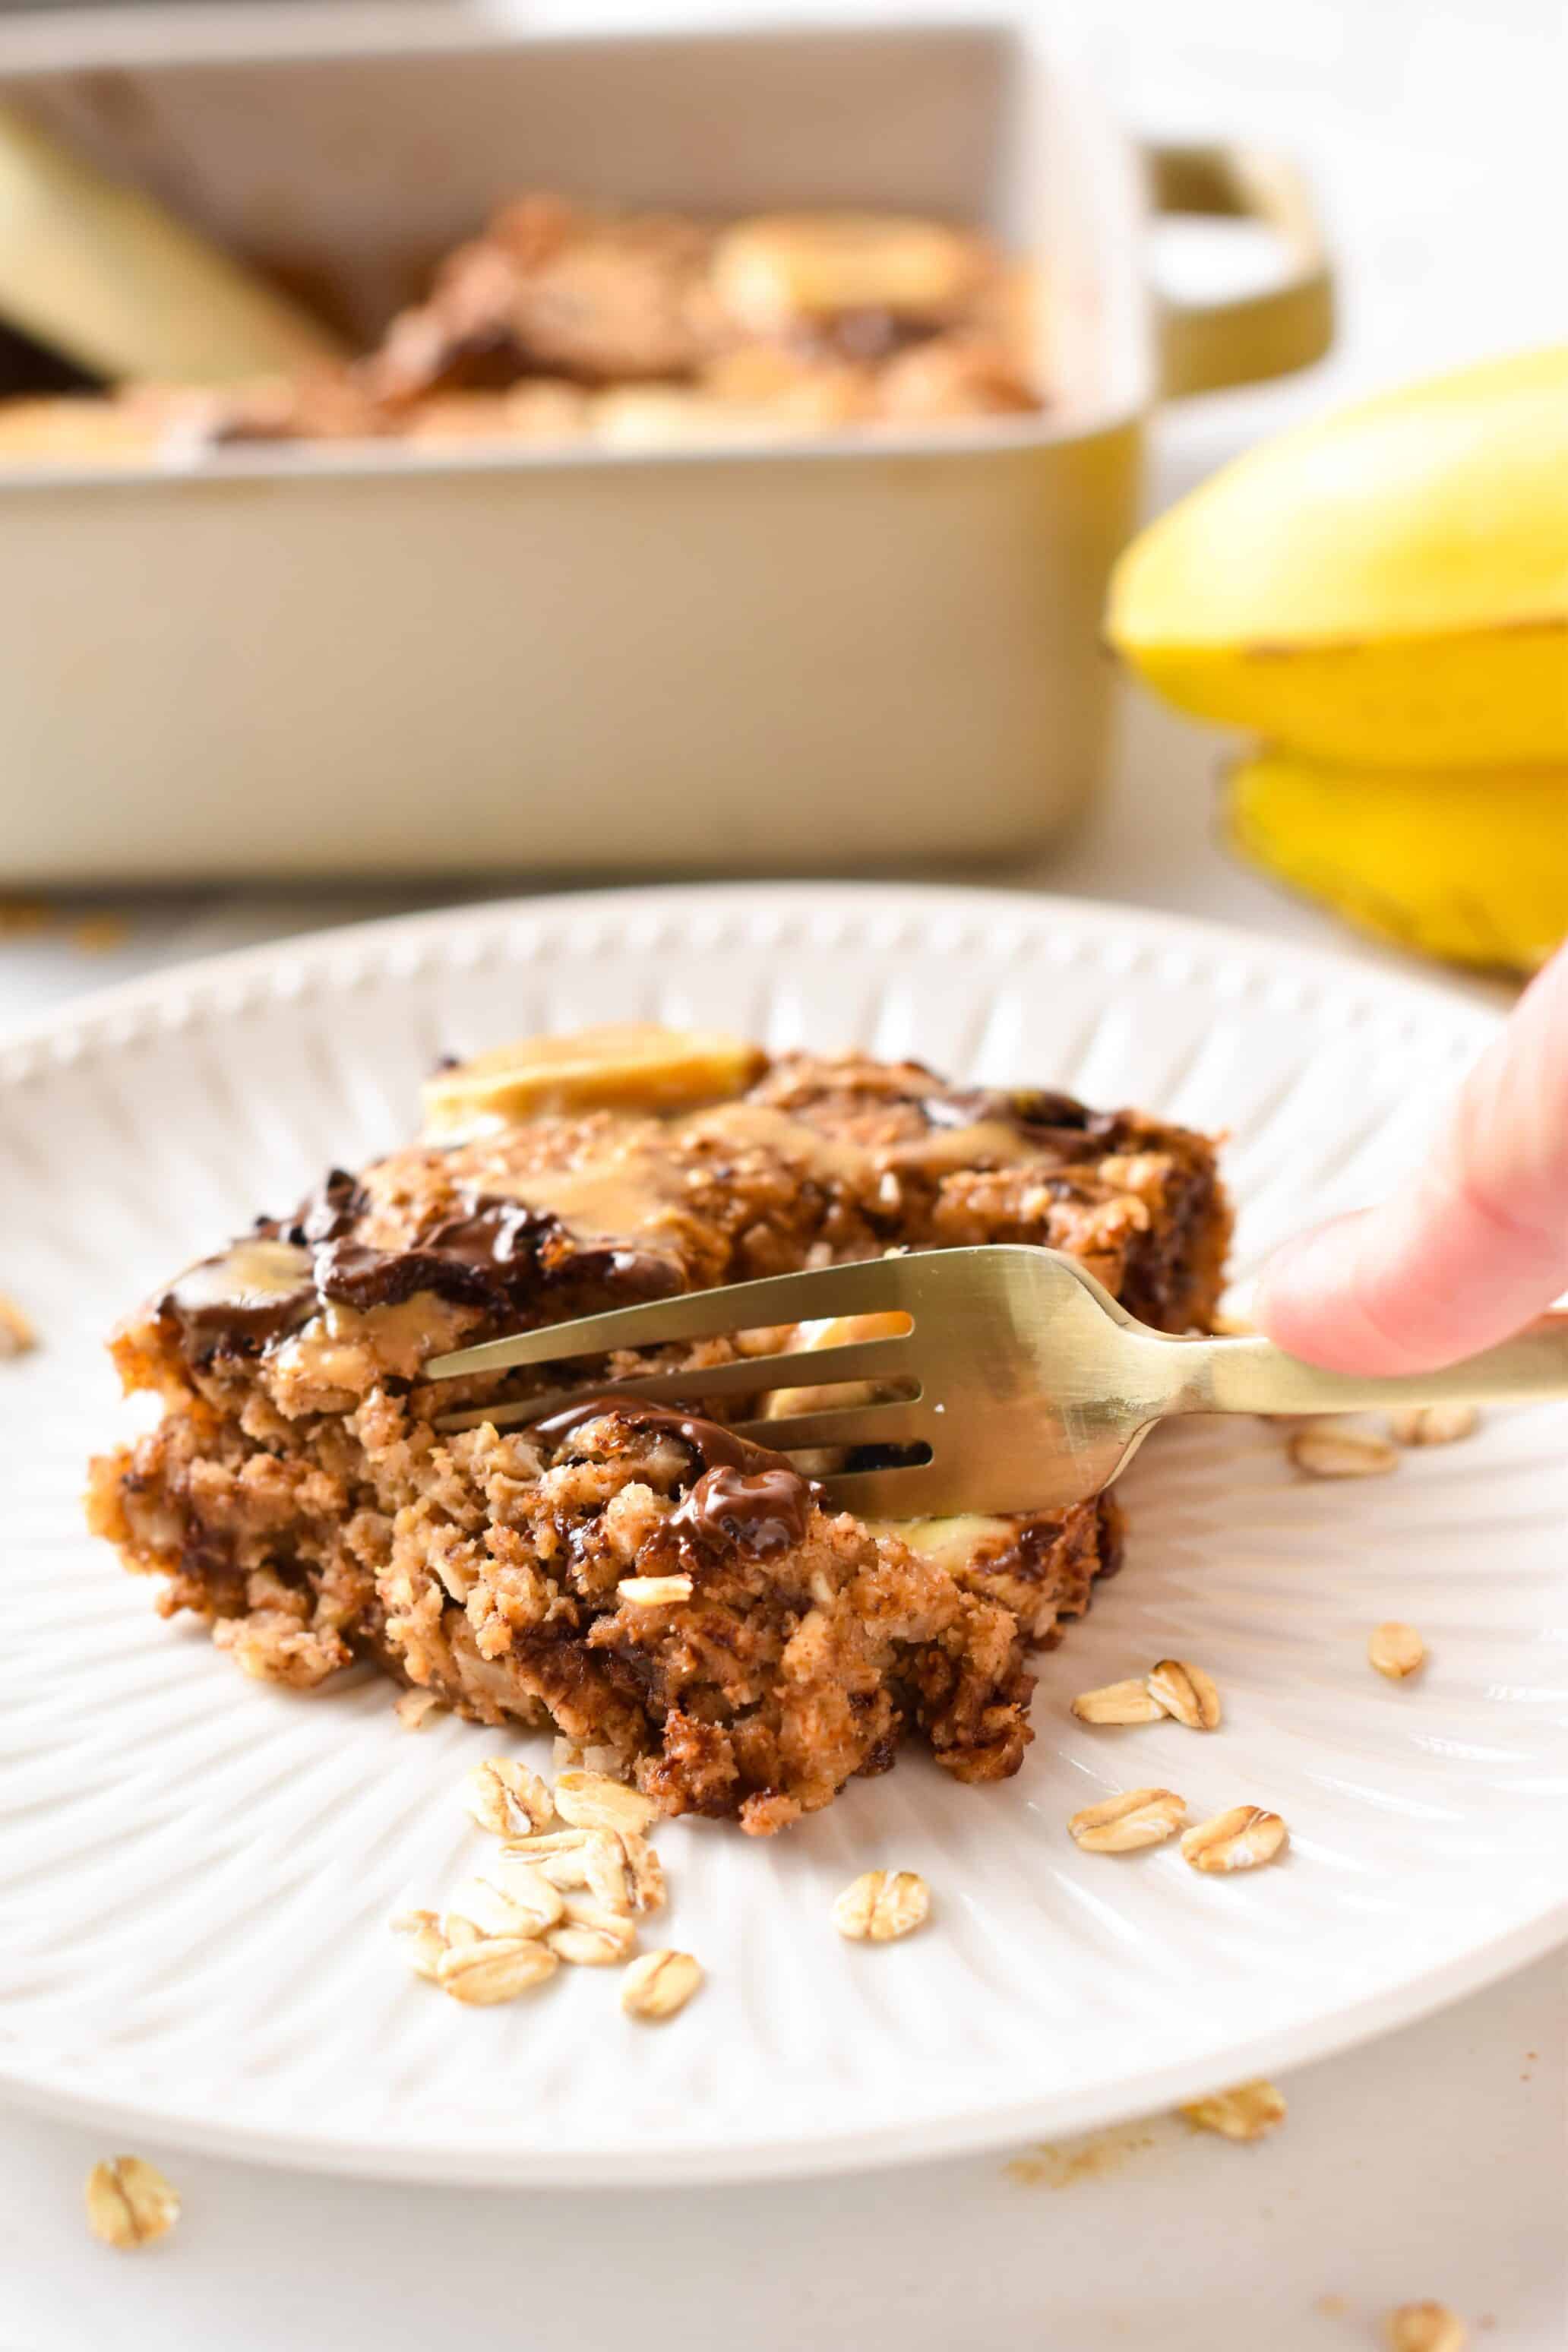 If you love banana bread for breakfast, but you are after a healthier version try these baked oats made with healthy ingredients. It tastes like your favorite banana bread but is packed with fiber, proteins, and no refined sugar needed.